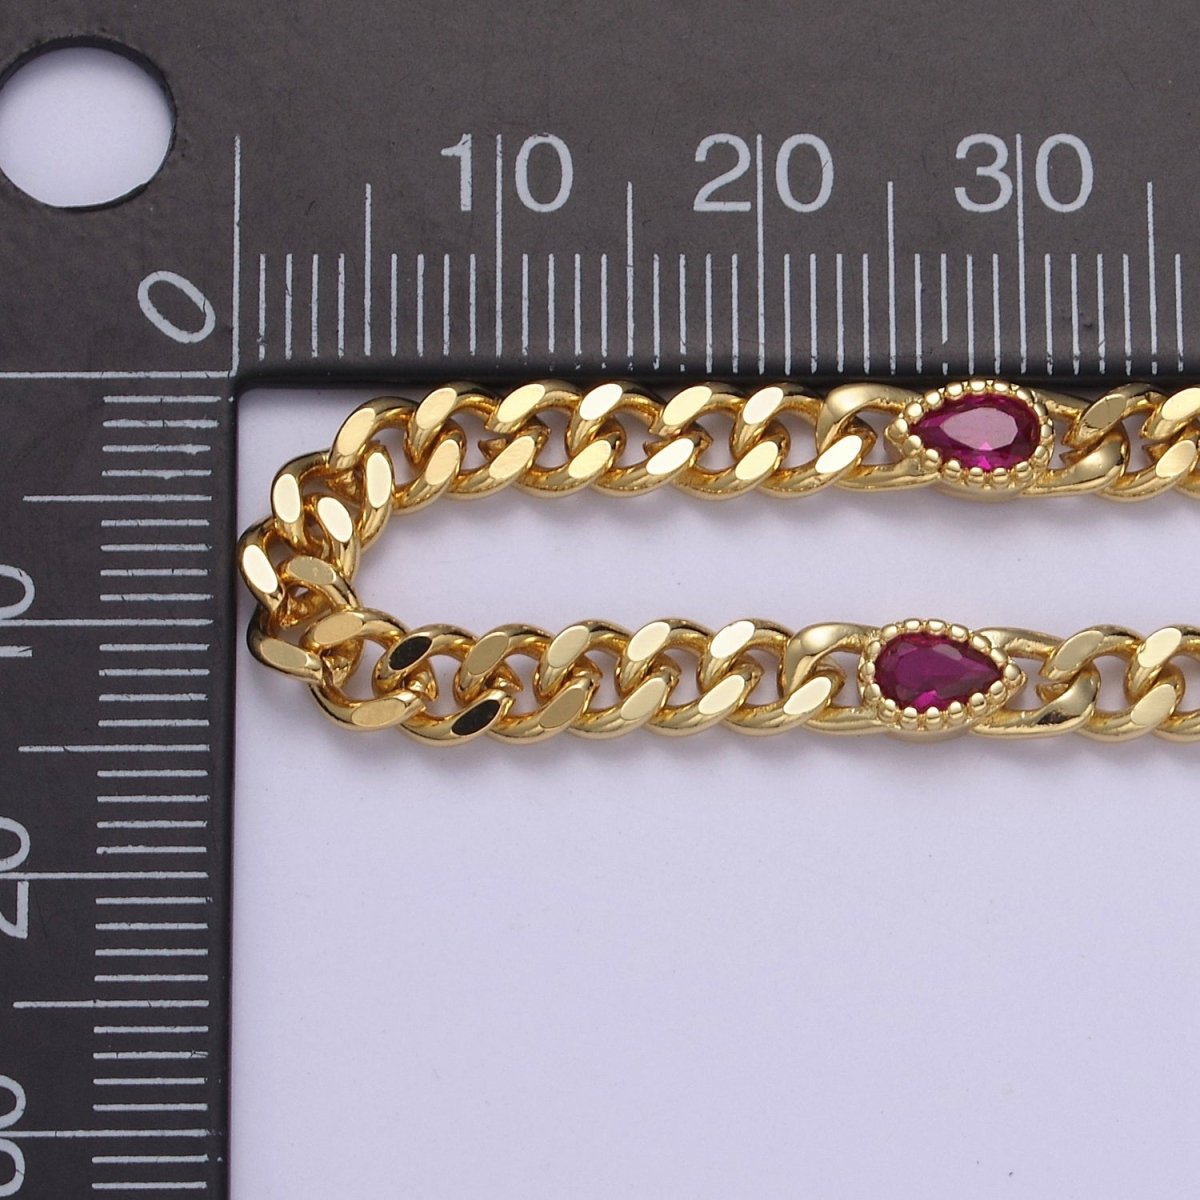 24K Gold Filled Flat Curb Chain with Crystal Cubic Zirconia CZ Teardrop Connector, 4.5mm in Width Unfinished Curb Chain by Meter | O-081 ~ O-083 O-090 WA-1364 Clearance Pricing - DLUXCA